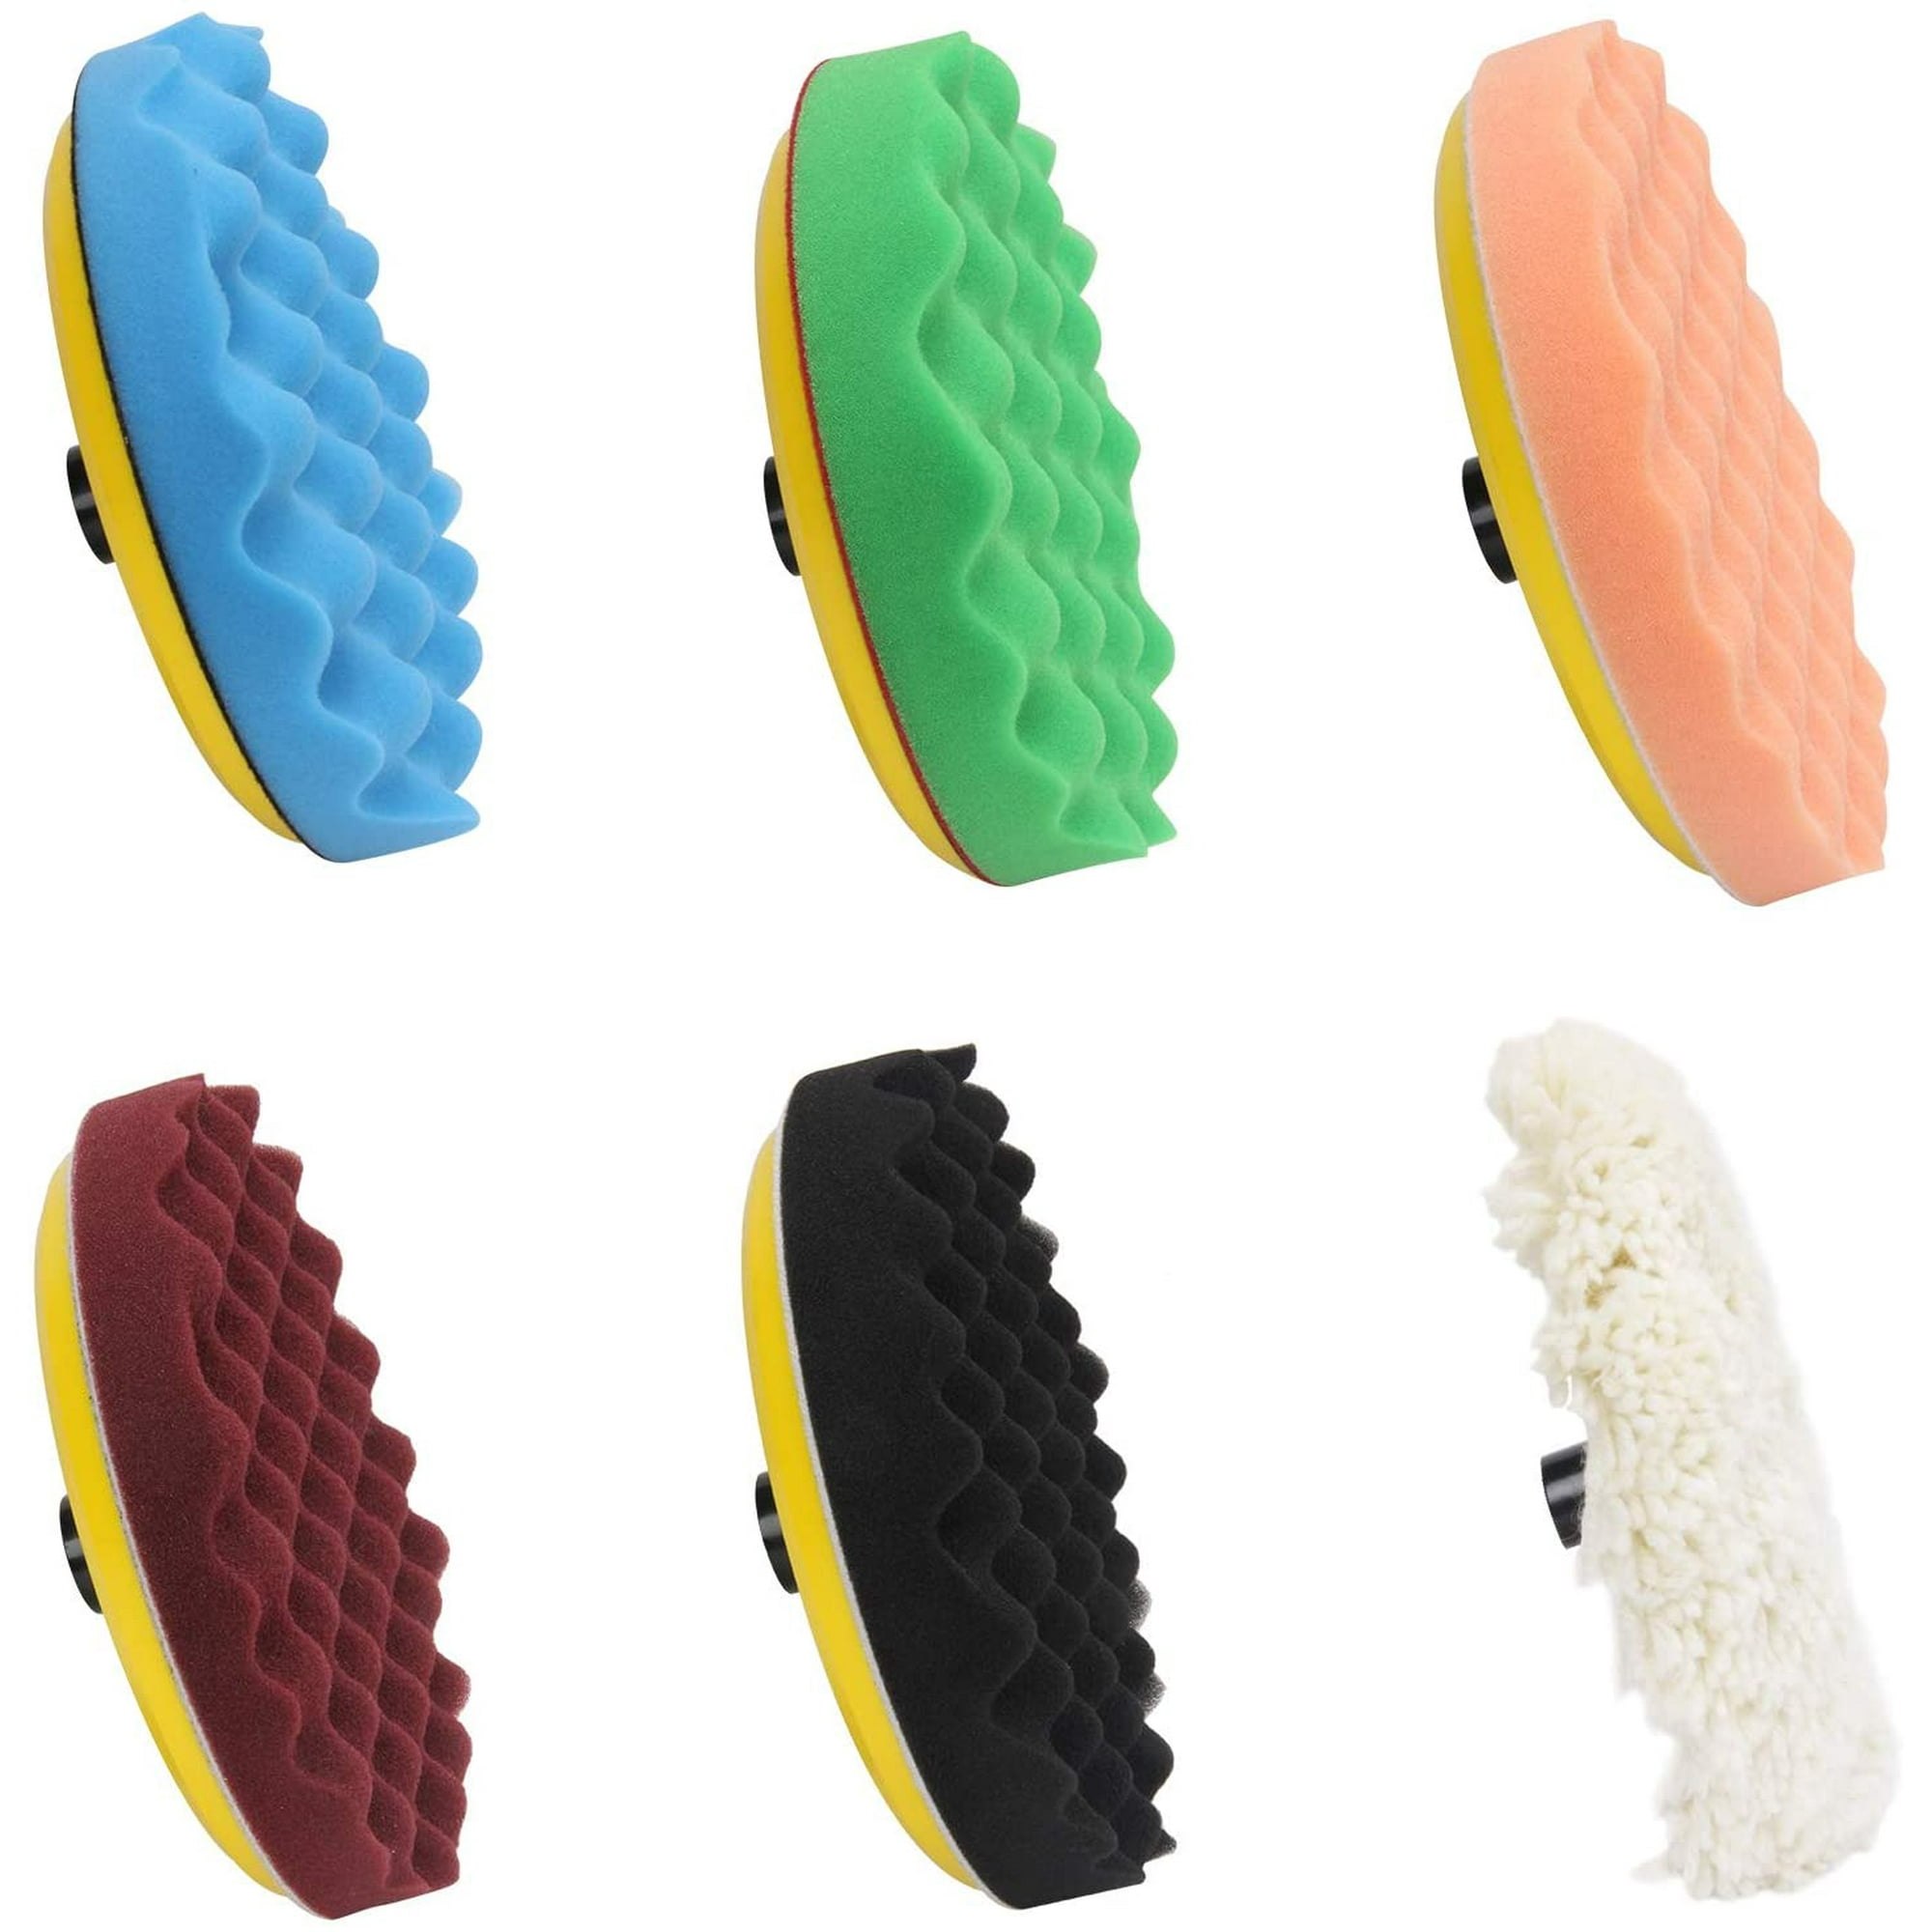  Niligan Foam Buffing Pad Cleaning, Car Beauty Polishing  Machine, Polishing Pad Cleaning Bucket, Cleaning System, High Efficiency,  Easy to Use and Clean : Automotive